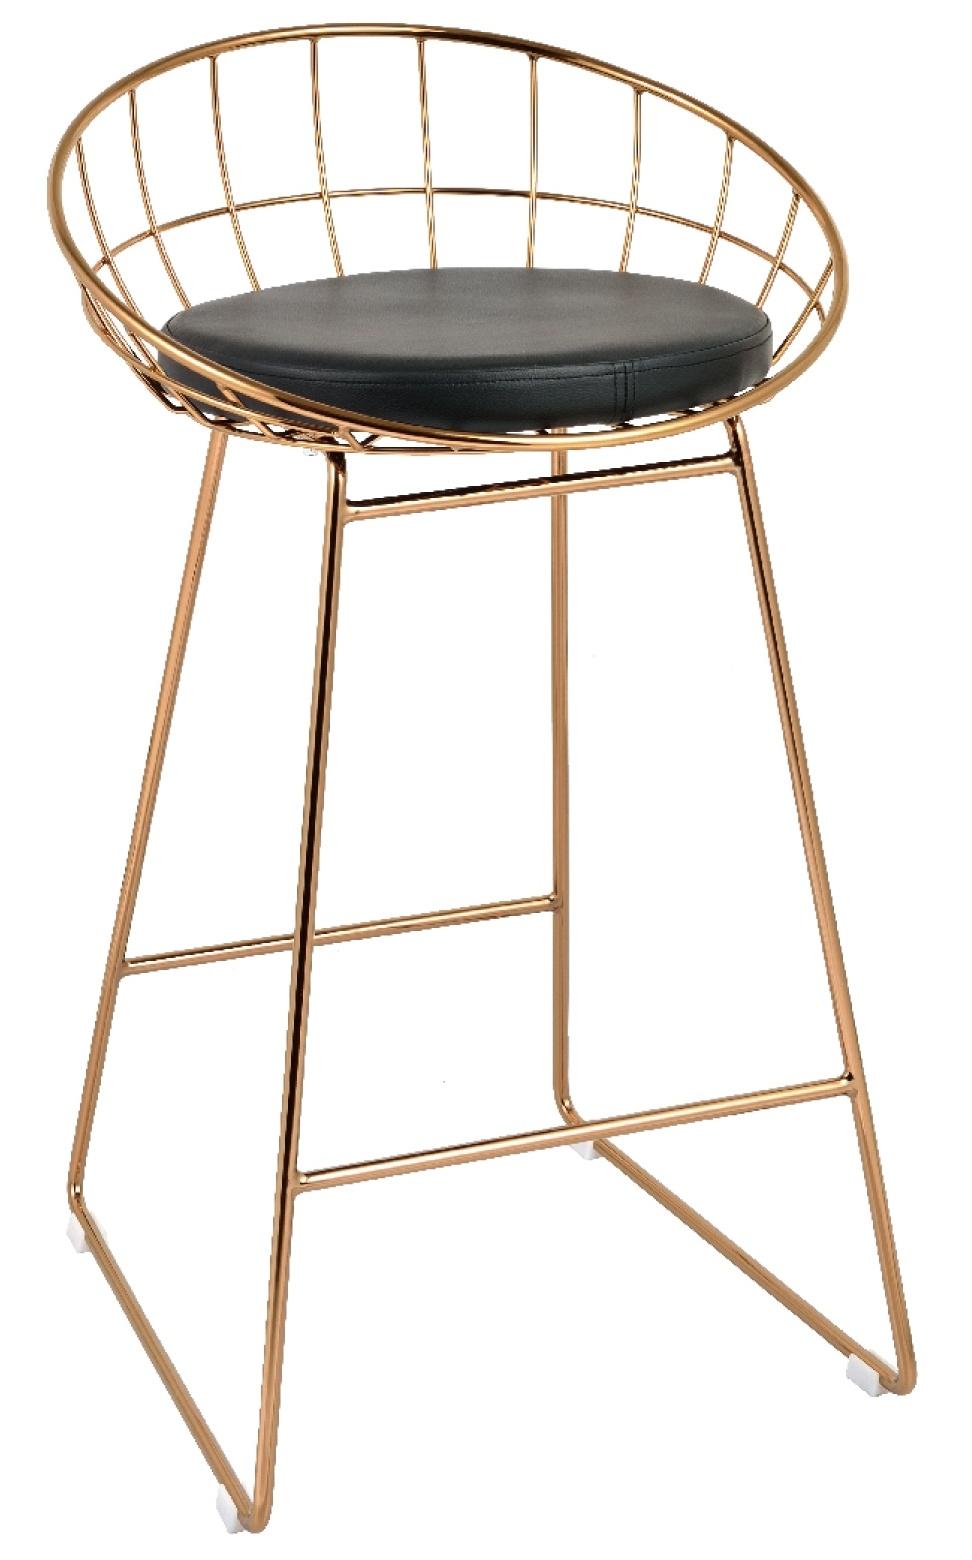 Factory New Design Wire High Counter Bar Chair Stool with Cushion